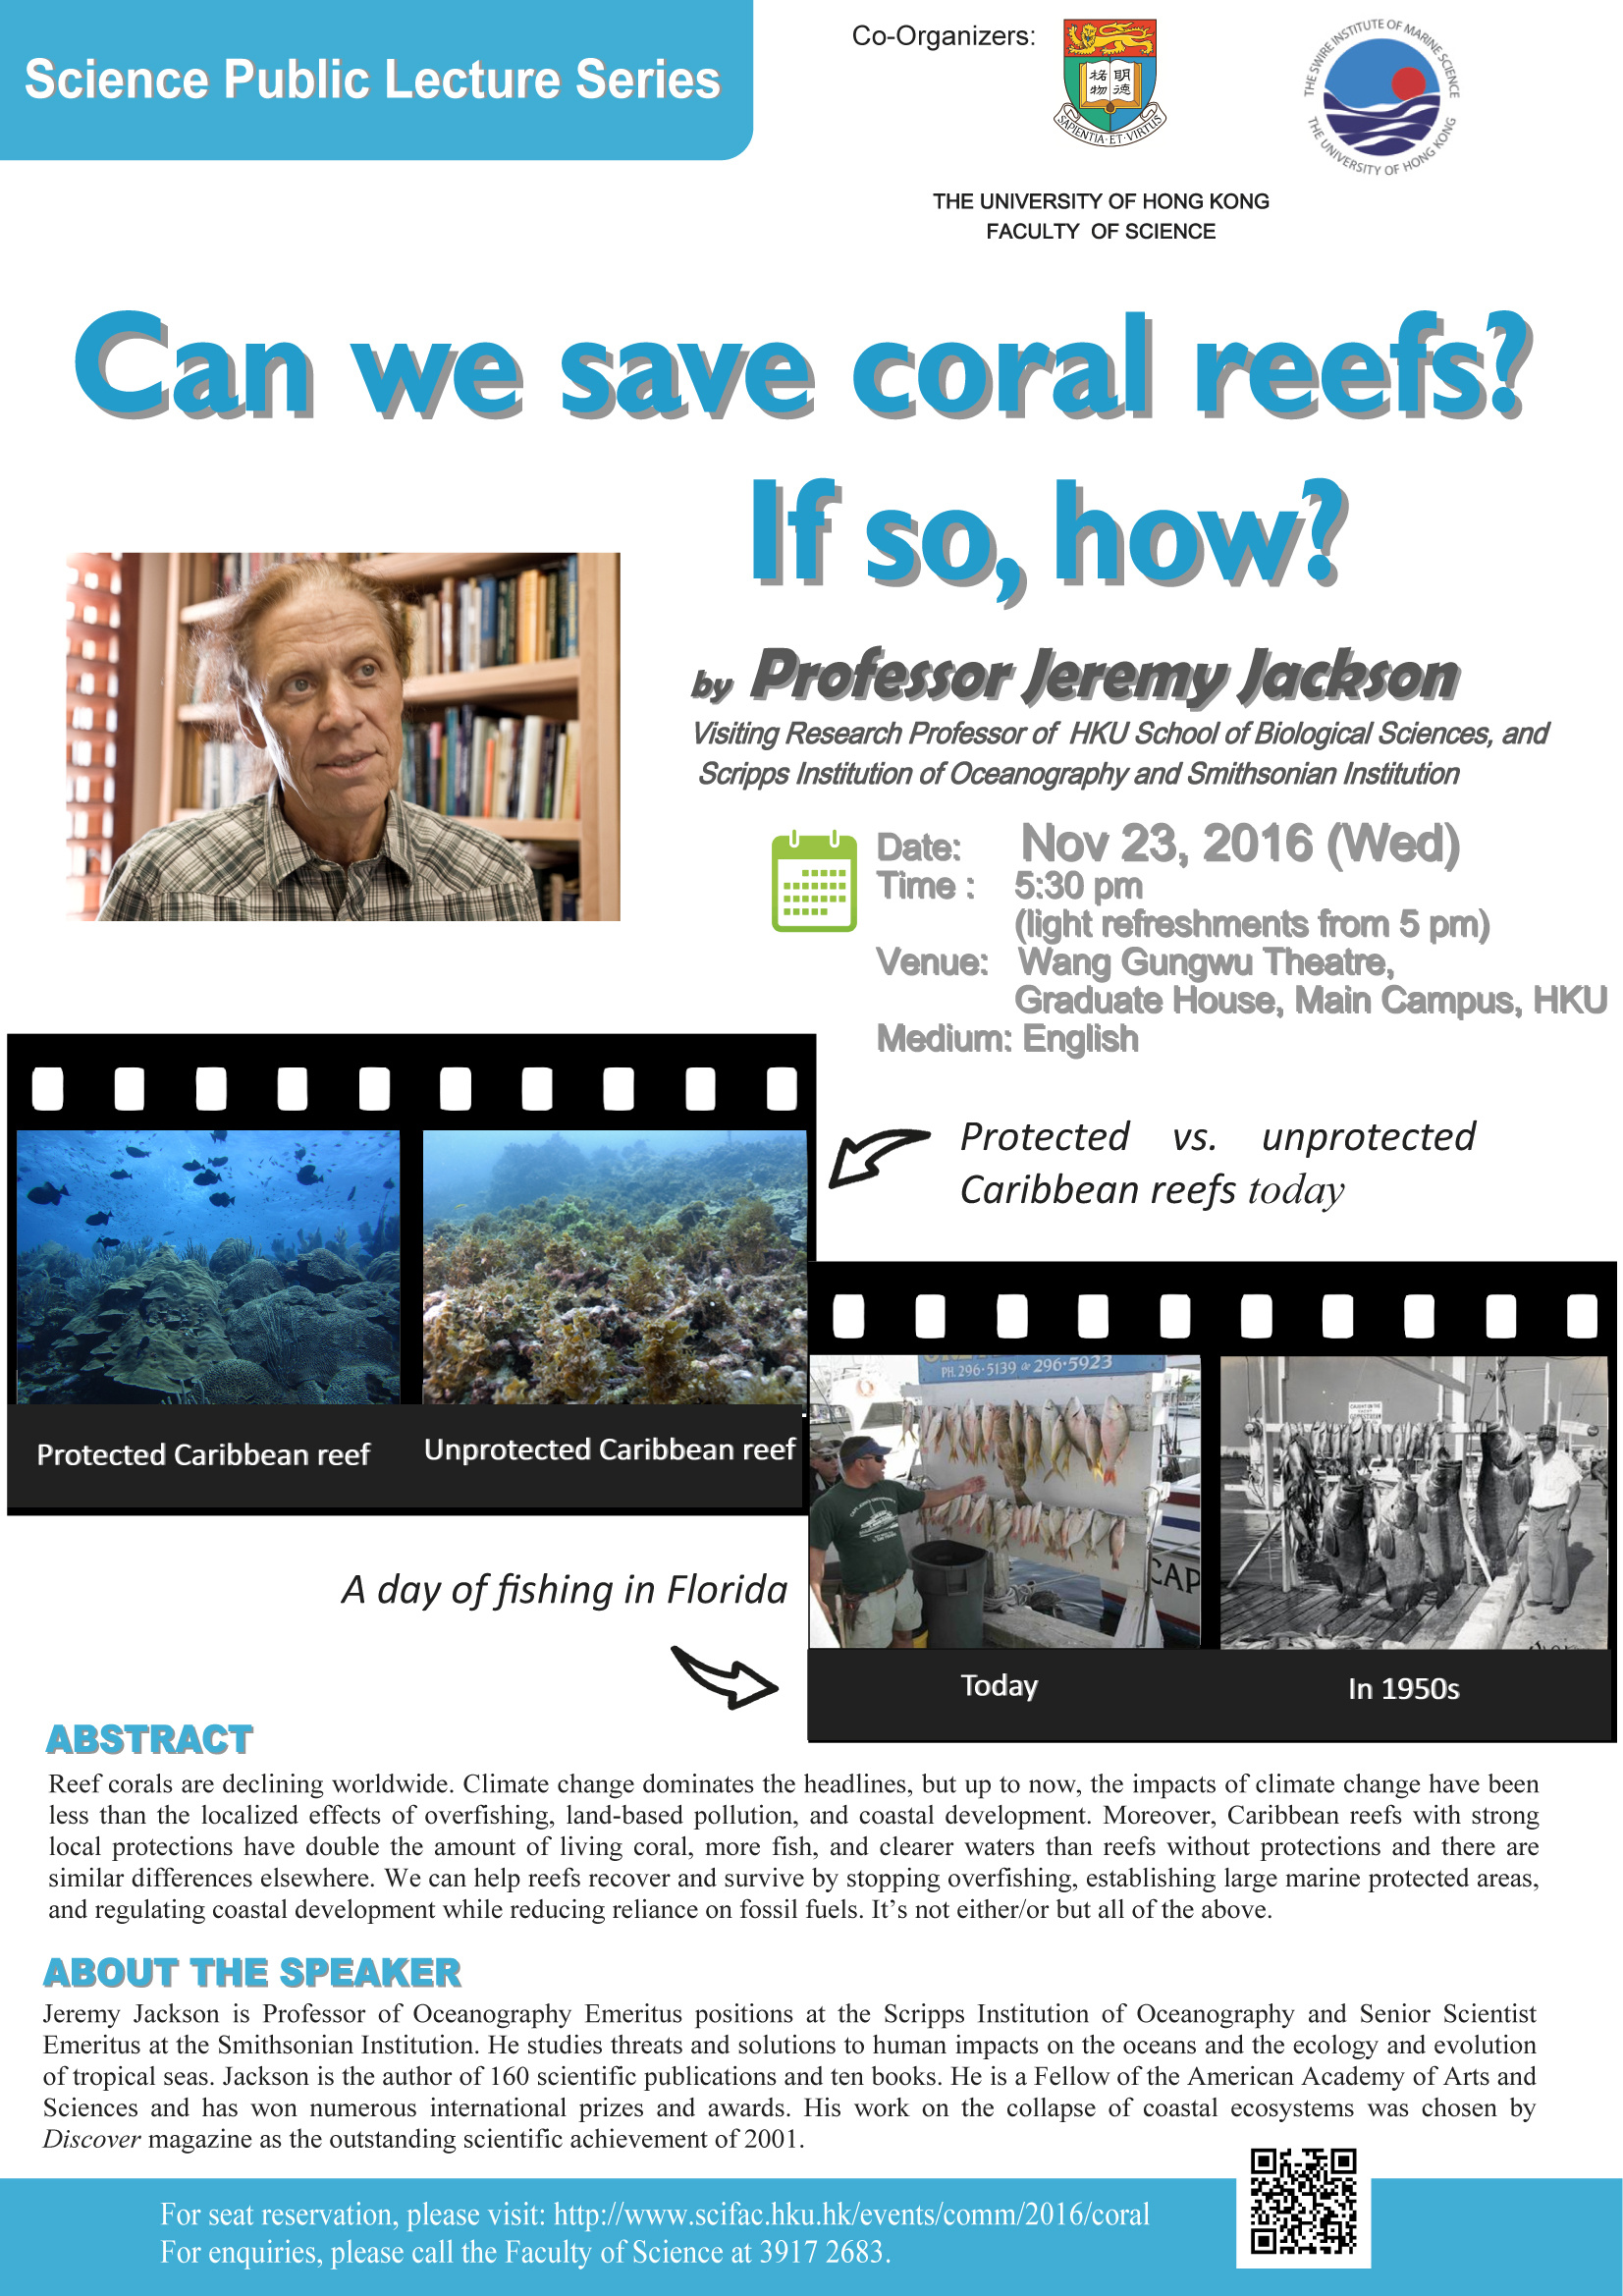 Public Lecture 'Can we save coral reefs? If so, how?'